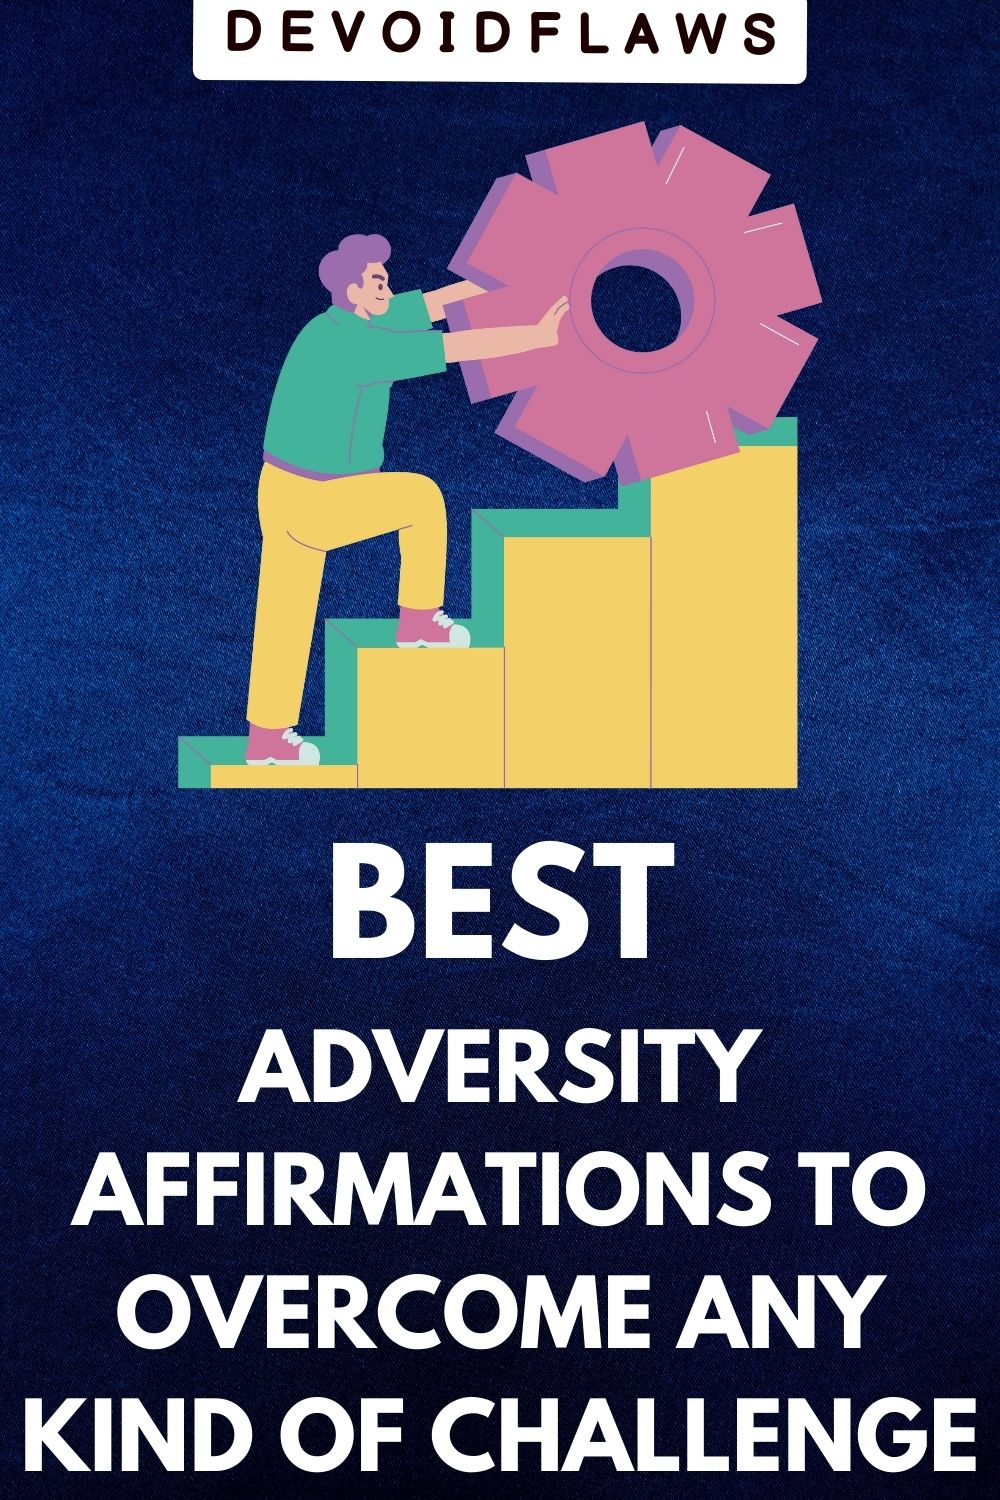 image with text - best adversity affirmations to overcome any kind of challenge